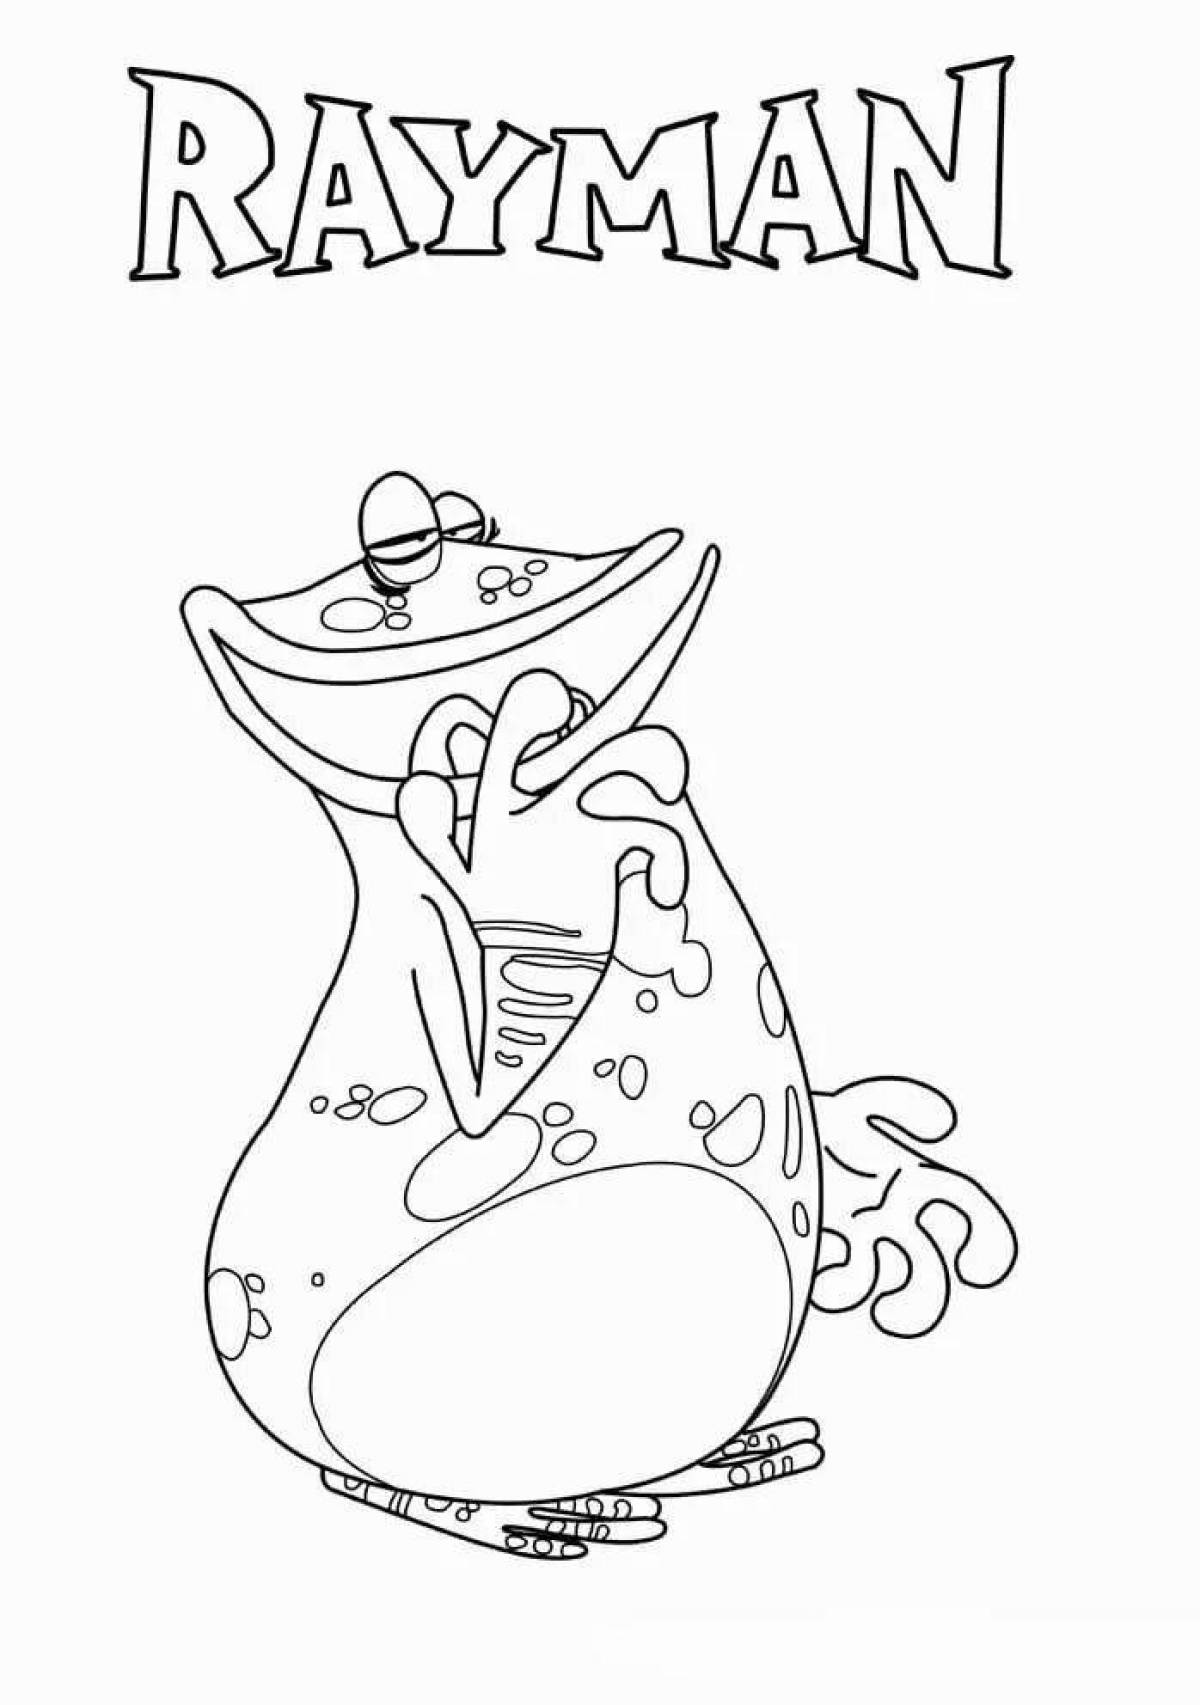 Glowing Rayman coloring page